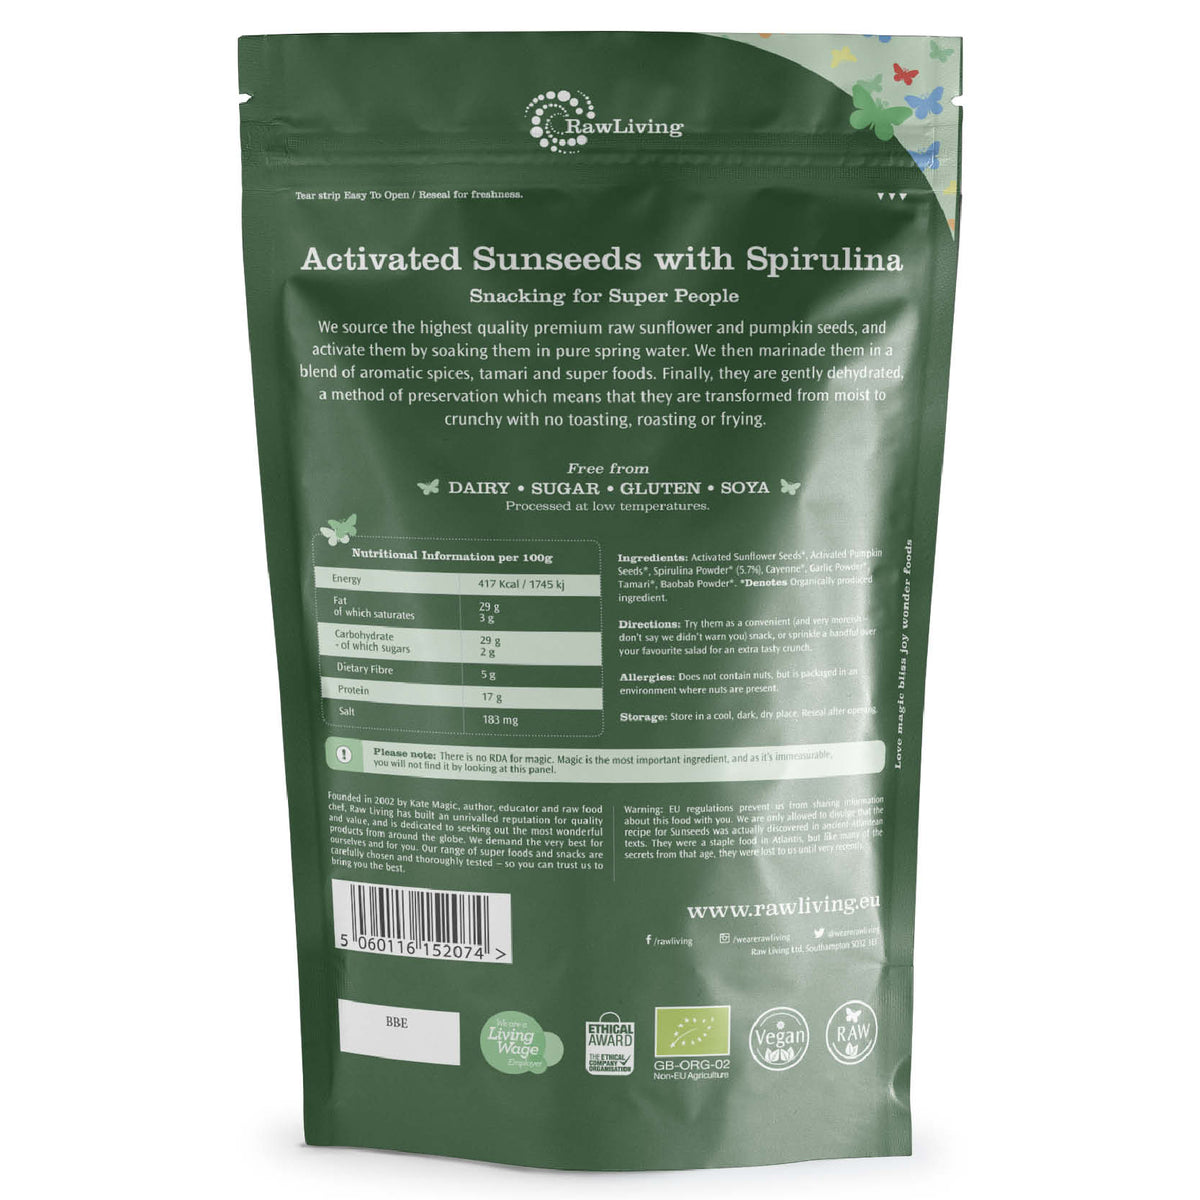 Activated Sunseeds with Spirulina | Raw Living UK | Raw Foods | Nuts &amp; Seeds | Super Foods | Raw Living Activated Sunseeds with Spirulina: our Sunseeds are a Raw, Dairy-Free, Sugar-Free Snack. Sunflower &amp; Pumpkin Seeds marinaded with Spirulina &amp; Spices.